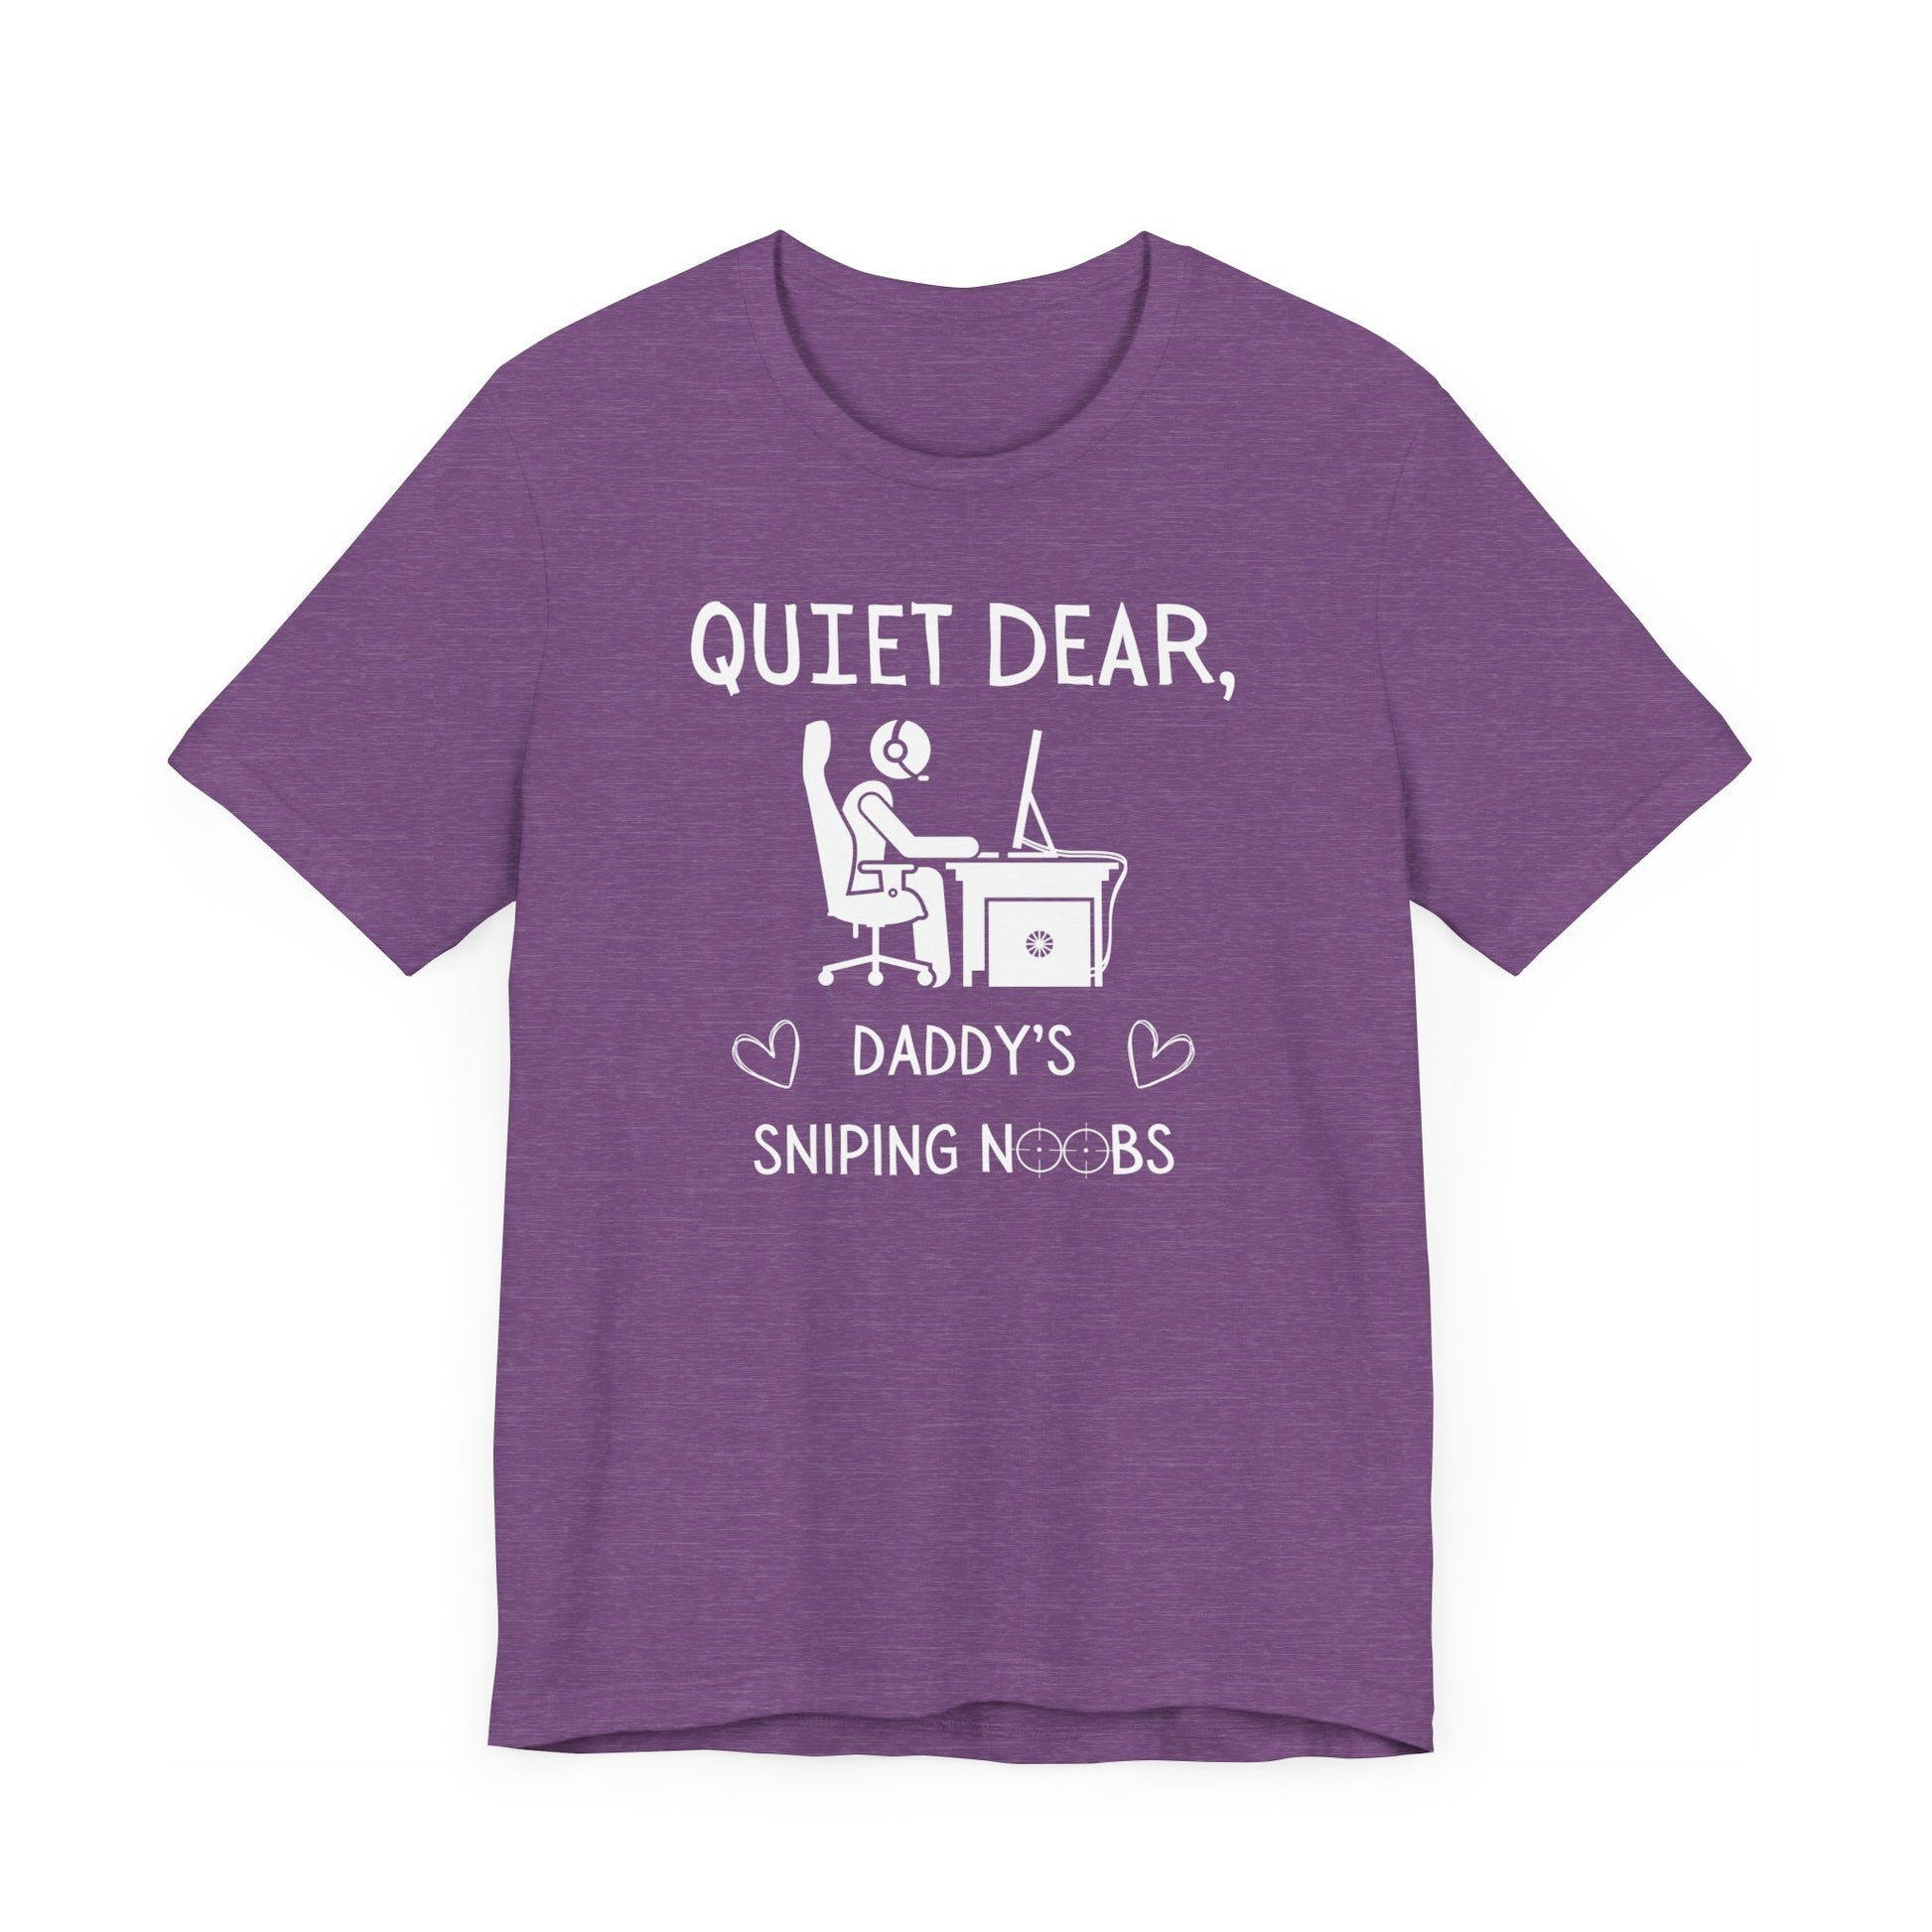 A flat image of a purple heather t-shirt that reads Quiet Dear, Daddy's Sniping Noobs in white text. The lower text is framed by two hearts, and the O's are in the shape of sniper scopes. In the center of the shirt is an image of a person at a desk with a gaming PC.